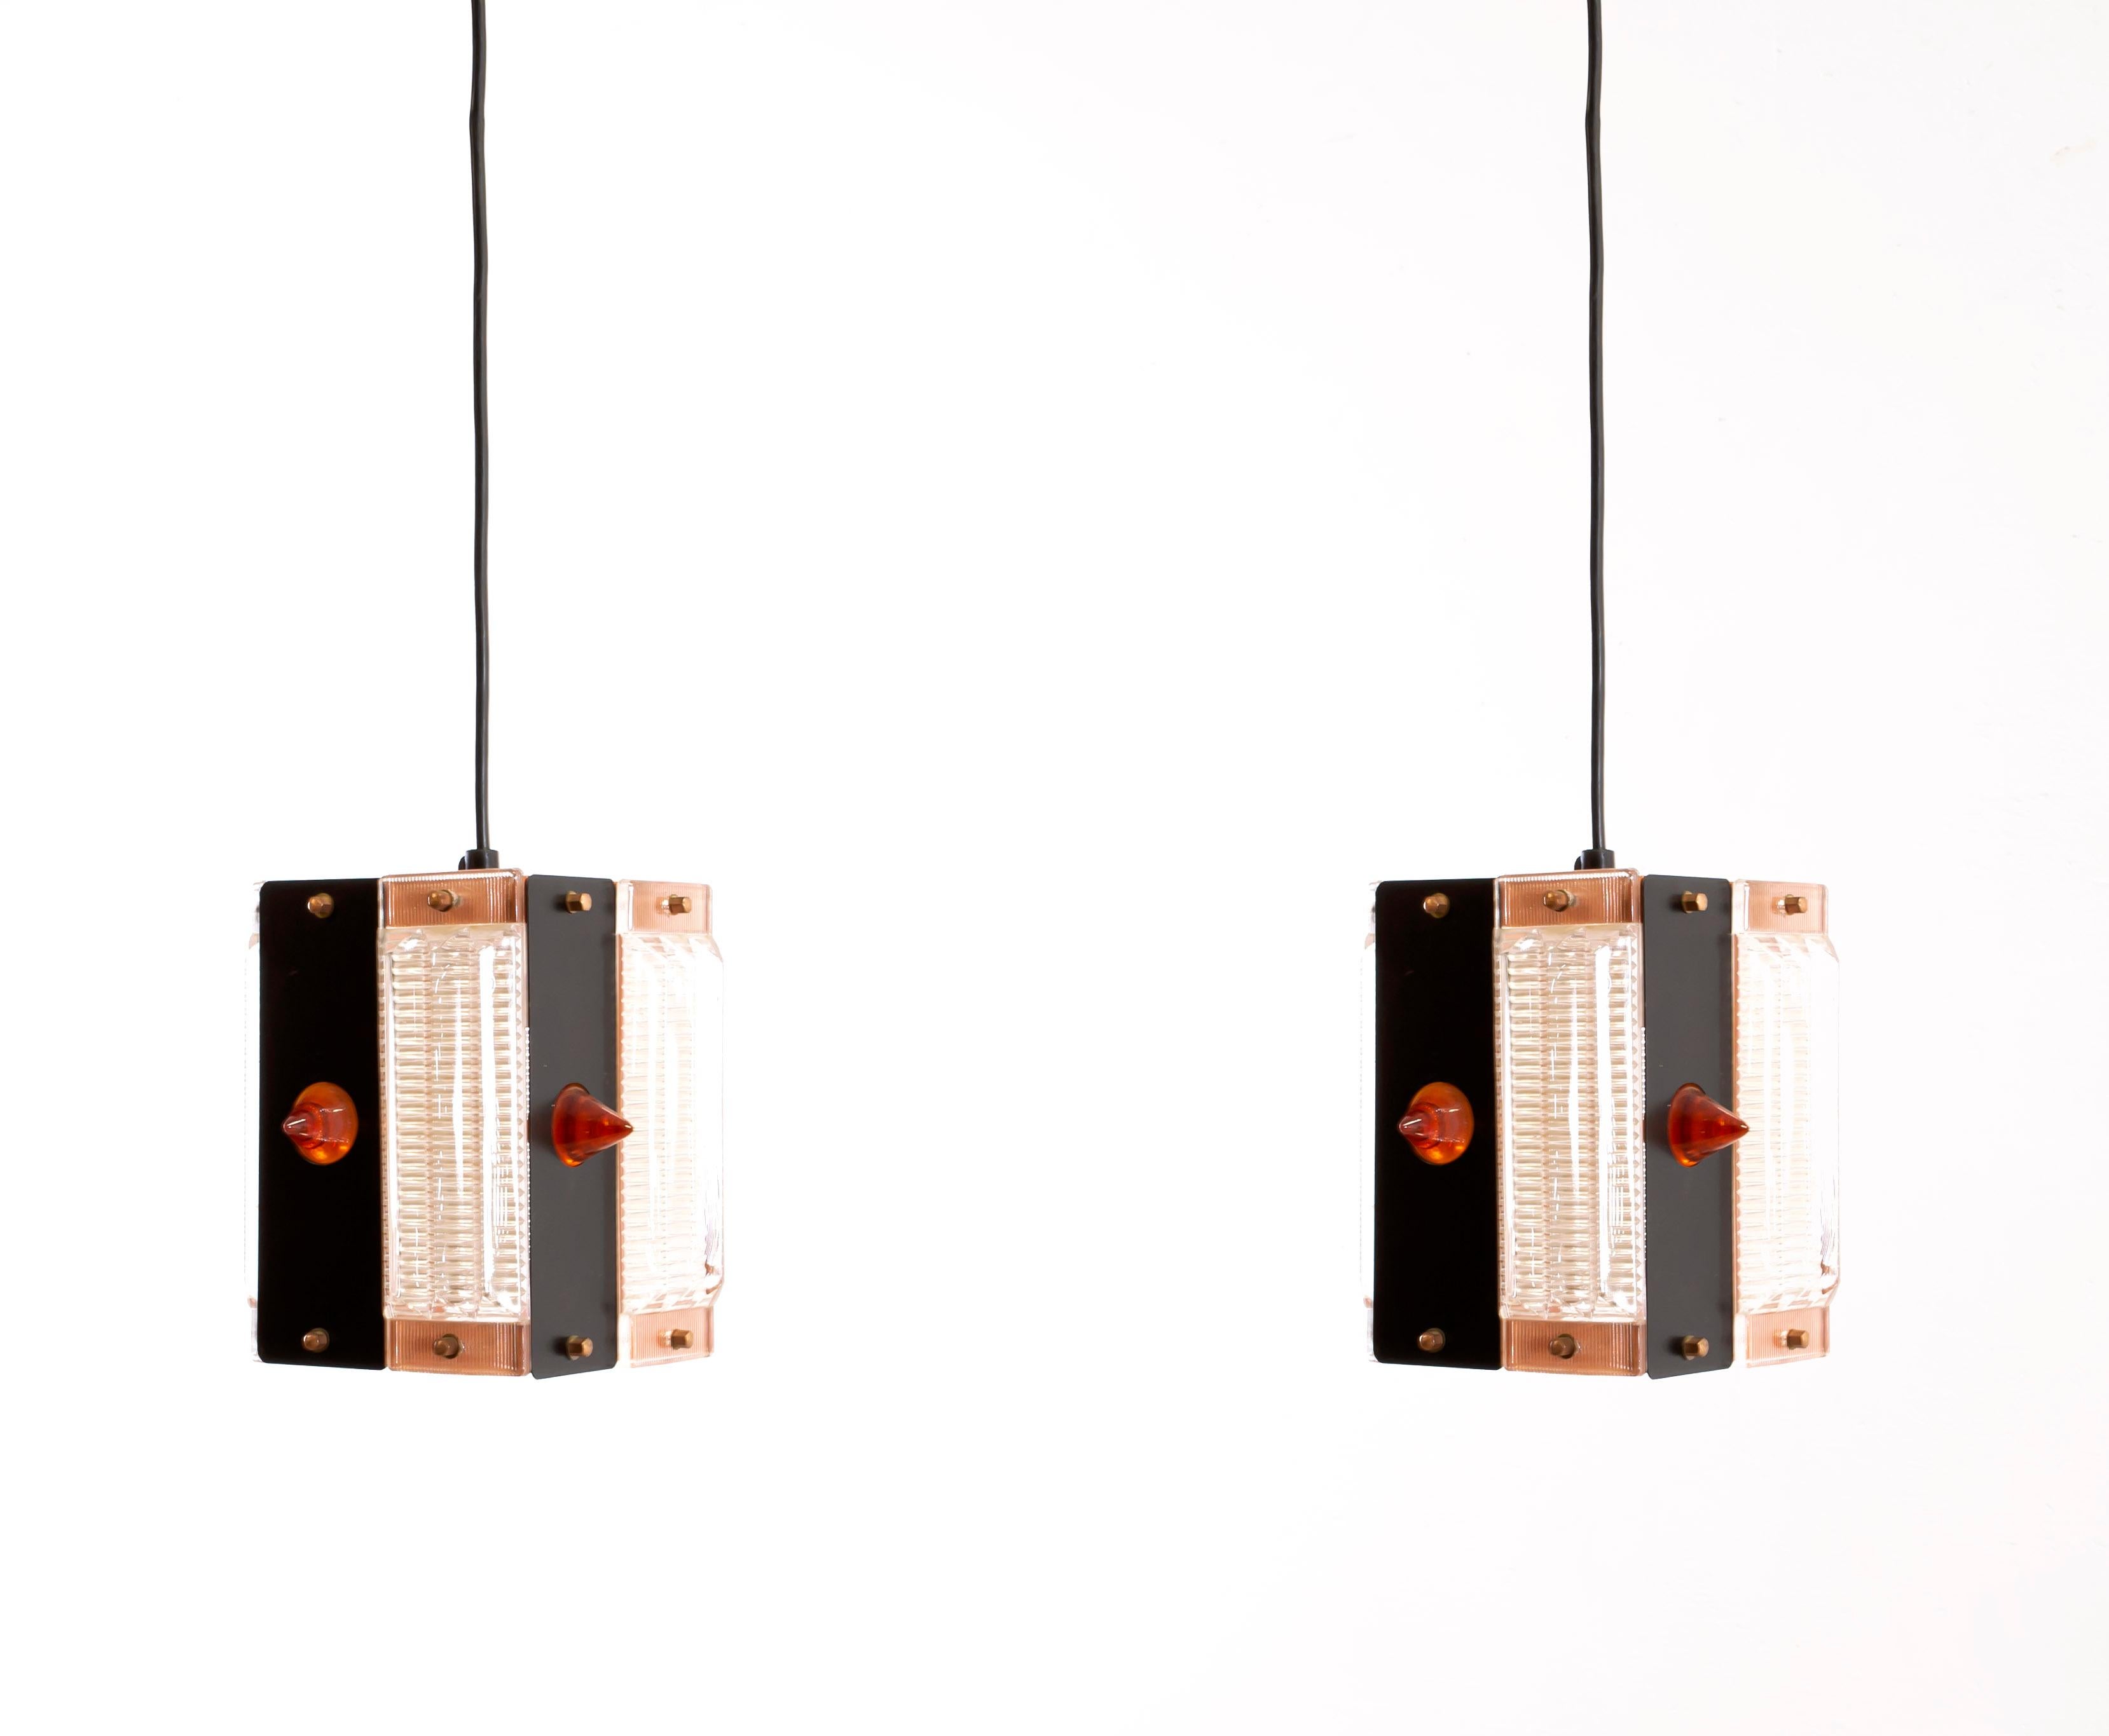 Decorative and rare pendants in painted steel, copper, and glass. Designed and made in Norway from circa 1960s second half. Both lamps are fully working and in very good vintage condition. Each lamp is fitted with an E27 bulb holder (works in the